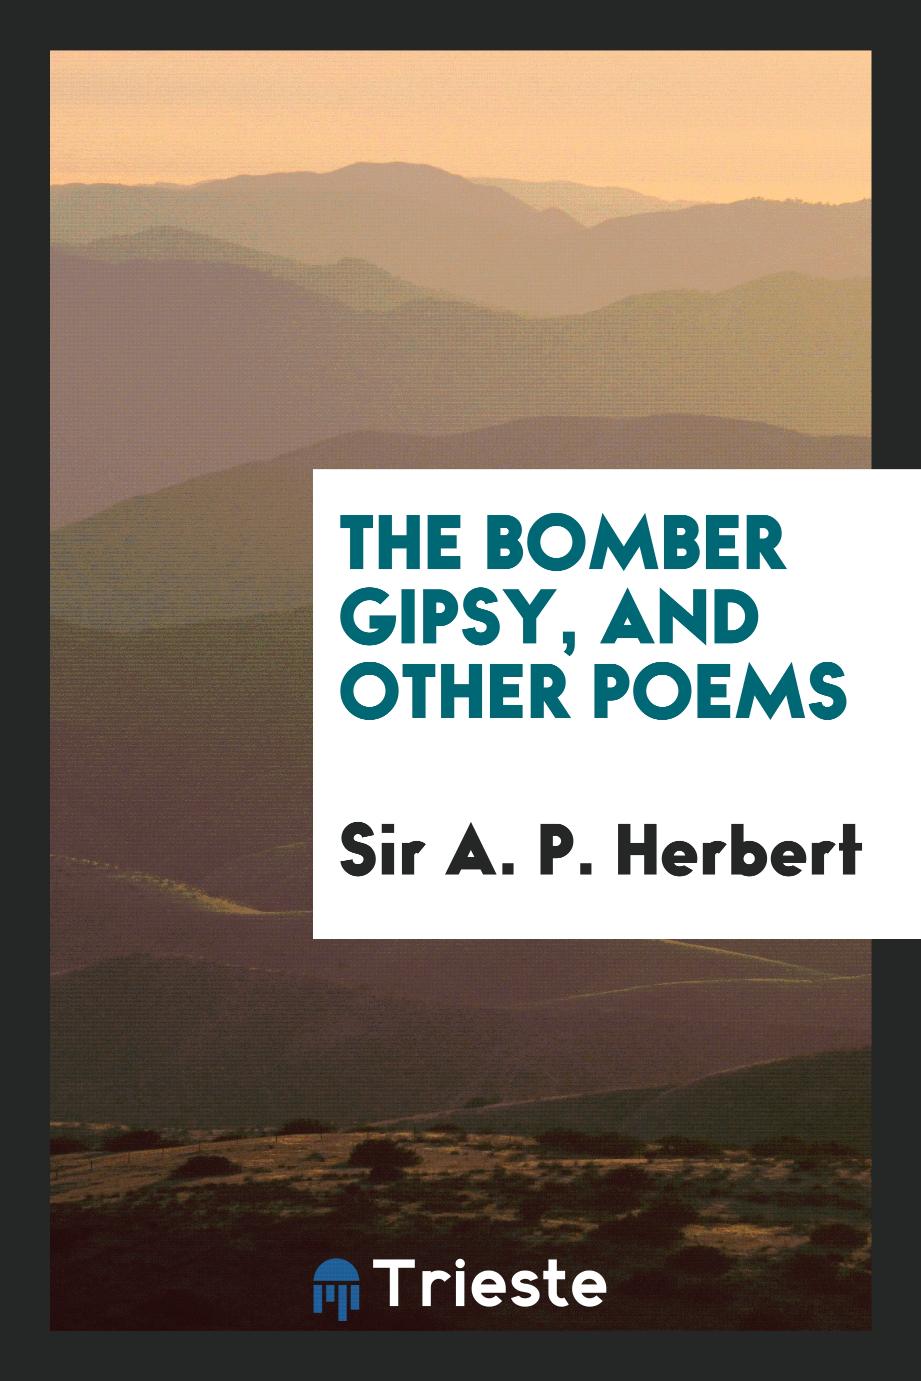 The Bomber gipsy, and other poems